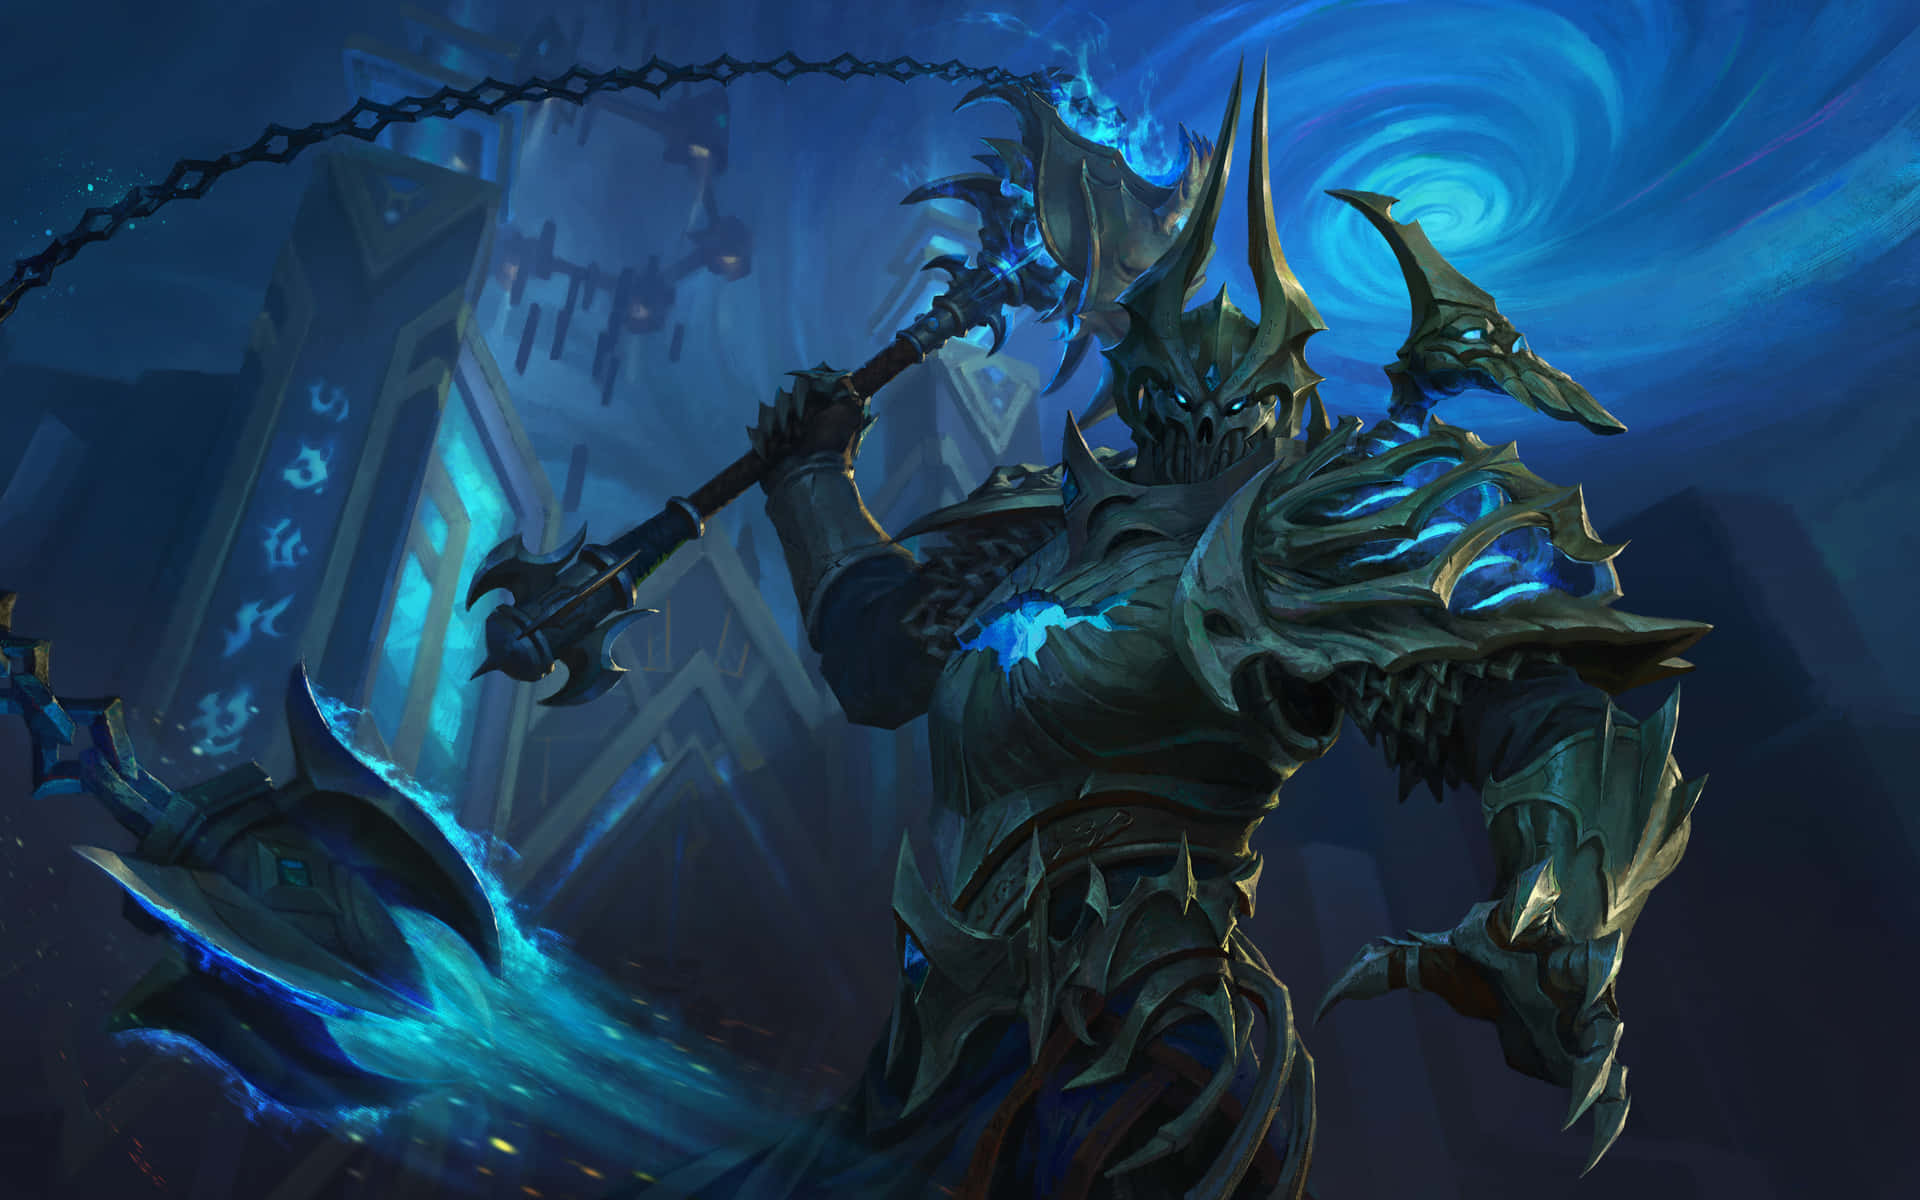 Explore the Shadowlands In The Legendary World of Warcraft® Wallpaper